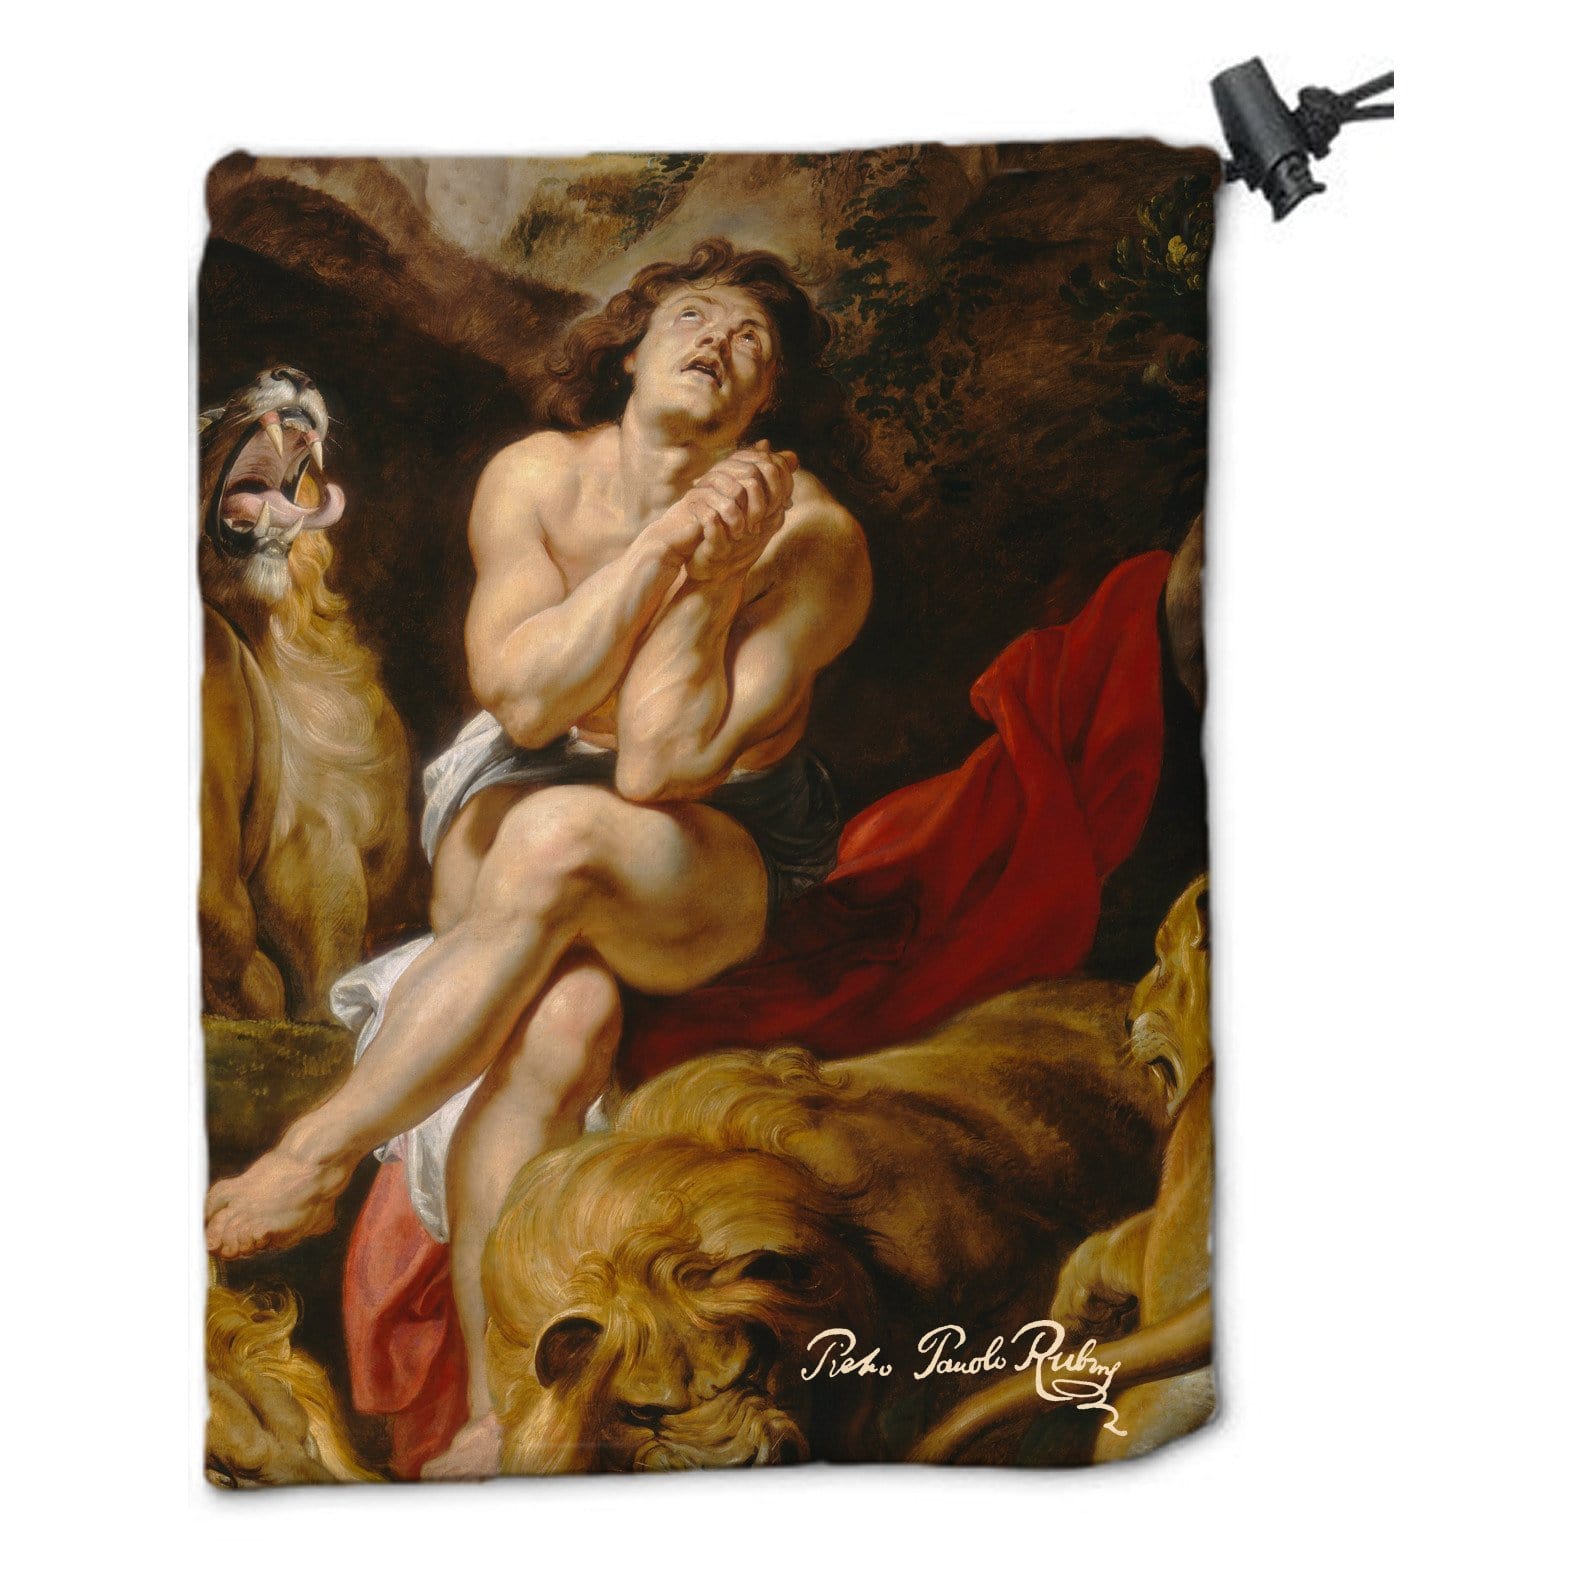 Cat Dice Bag by Peter Paul Rubens - Dice Bag - Original Magic Art - Accessories for Magic the Gathering and other card games